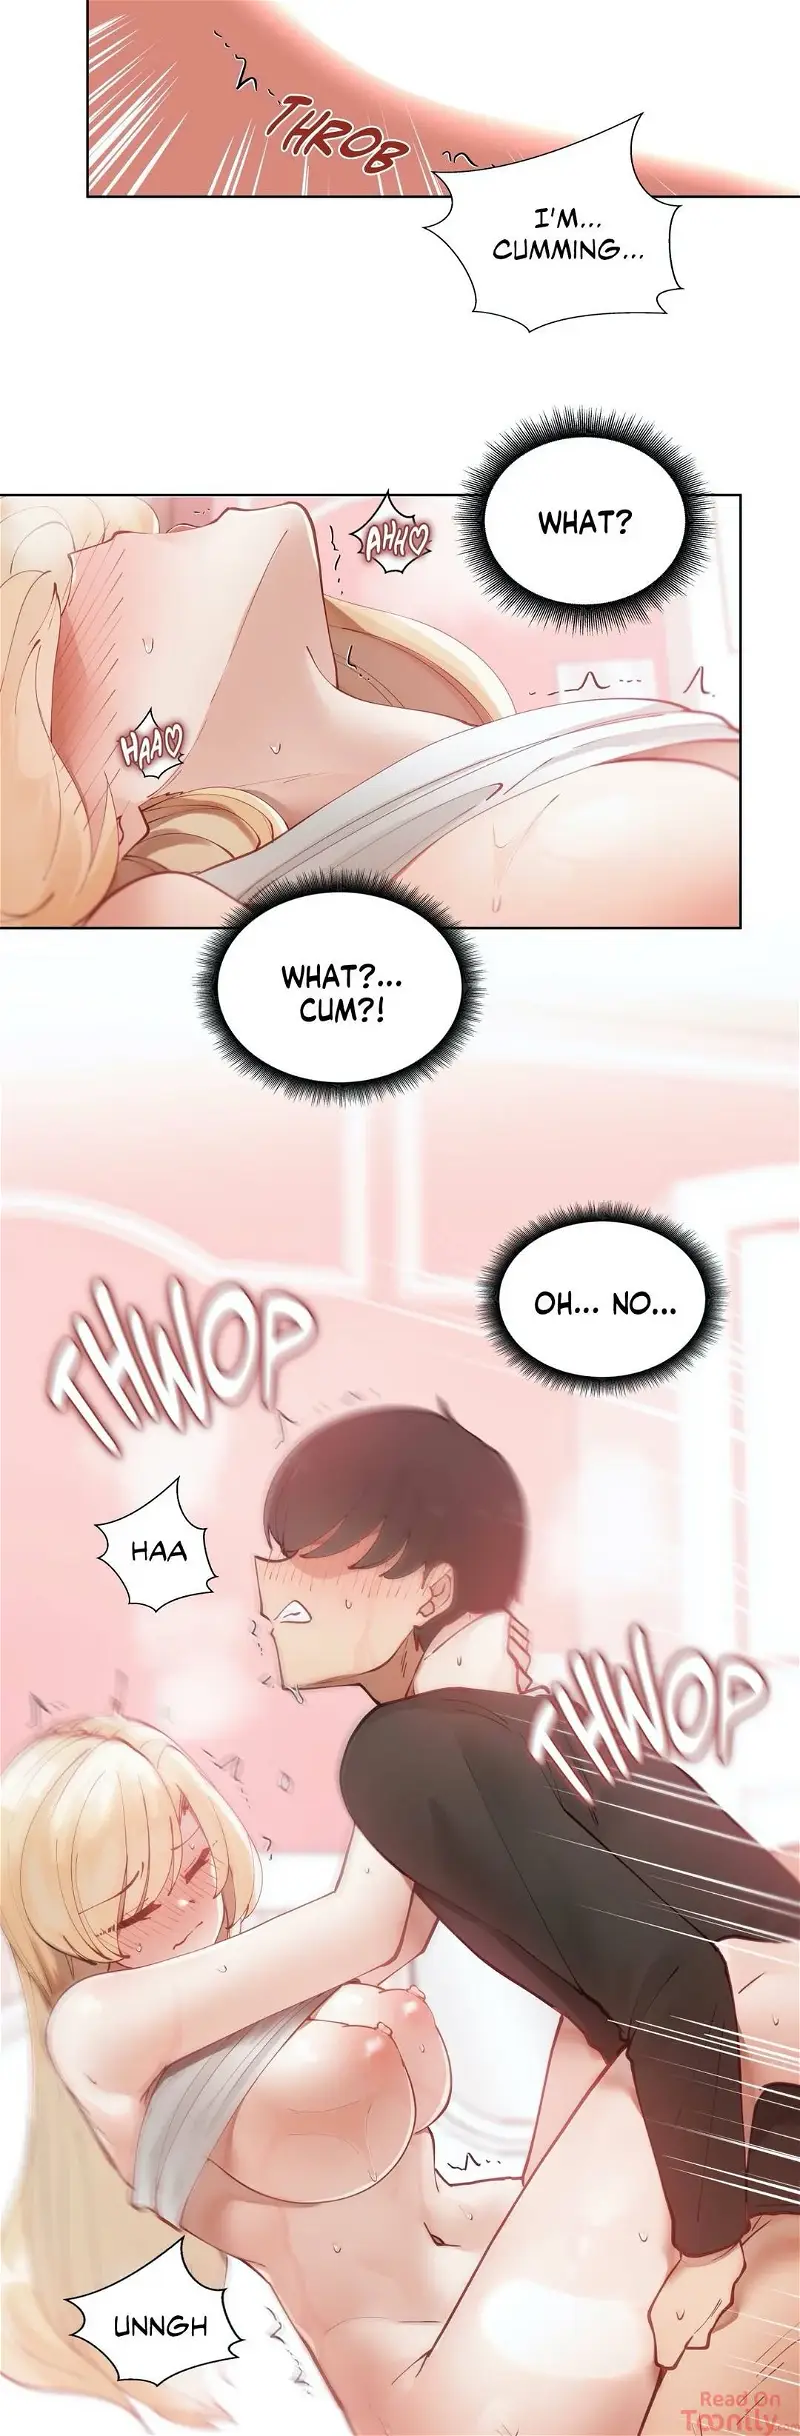 learning-the-hard-way-chap-3-34